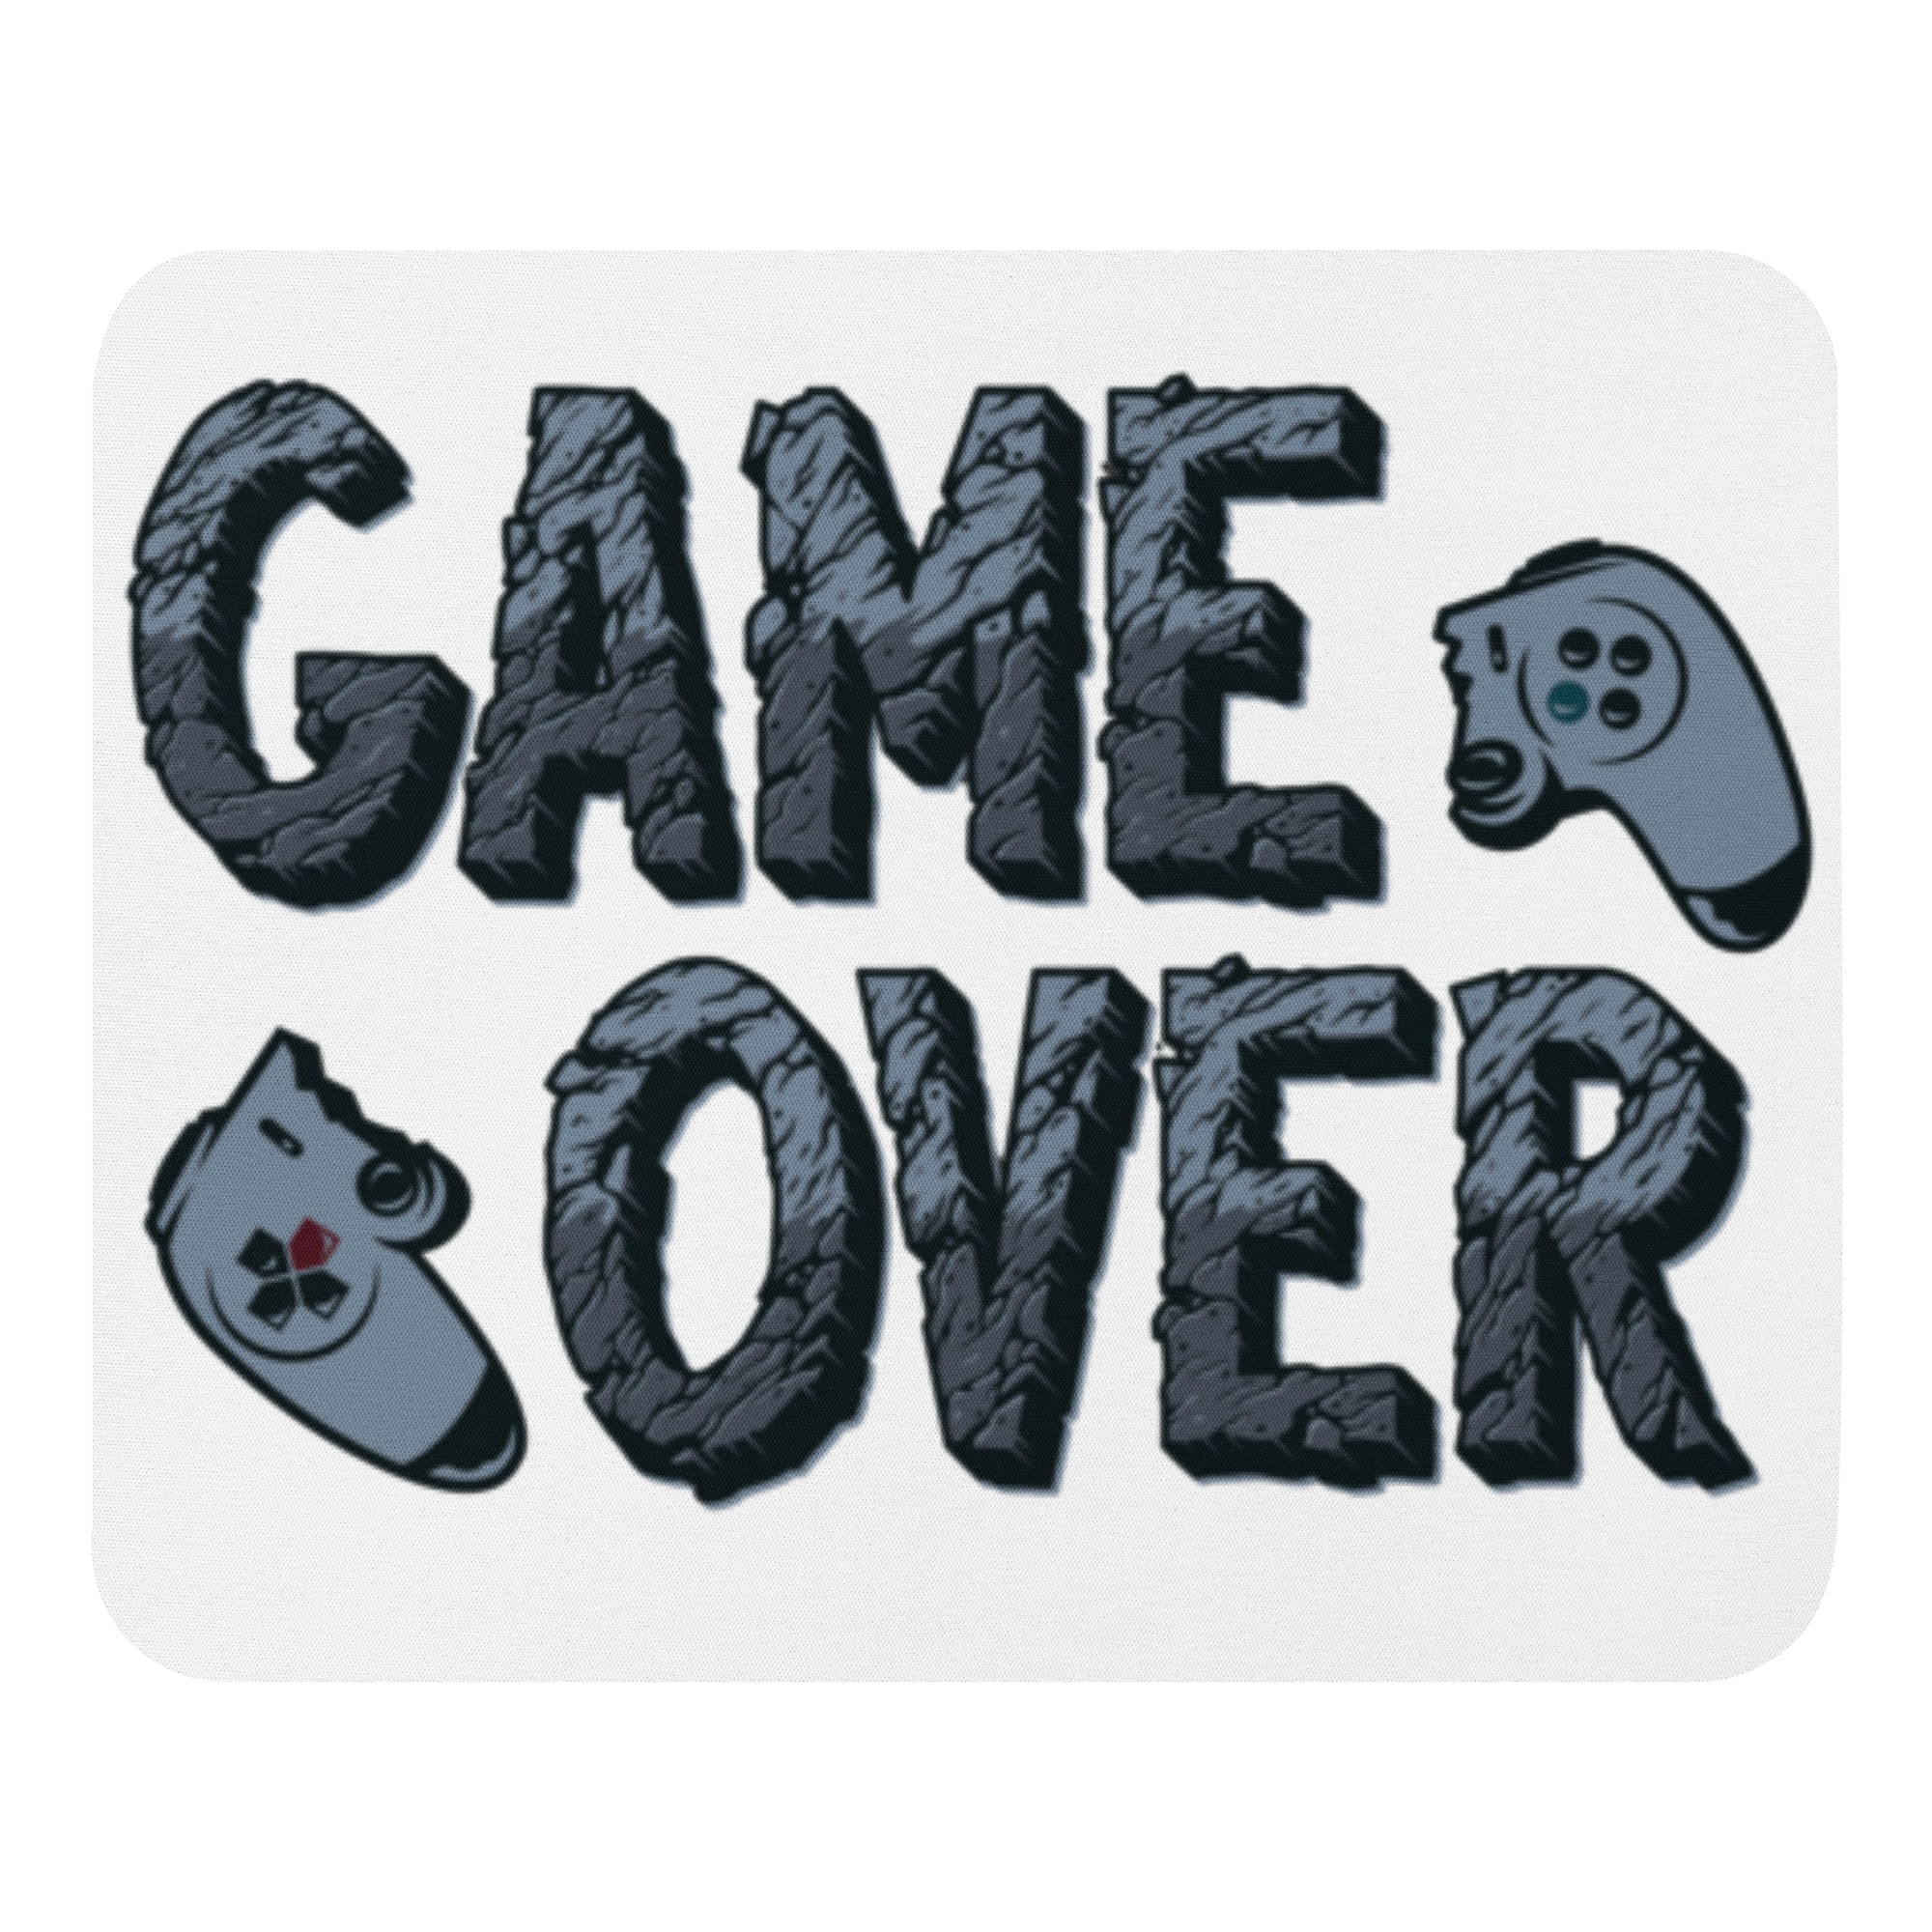 Game Over Mouse Pad Gaming mouse pad Cool mouse pad designs Gamer mouse pad Large mouse pad Custom mouse pad Mouse pad for gamers Funny mouse pad Gaming desk accessories Unique mouse pad Extended mouse pad Video game store Gaming merchandise Gaming accessories shop Online gaming store Video game shop near me Gaming console store PC gaming store Gaming gear shop Retro gaming shop Board game shop Anime merchandise Anime store online Japanese anime shop Anime figurines Manga shop Anime DVDs Anime accessories Anime apparel Anime collectibles Anime gifts